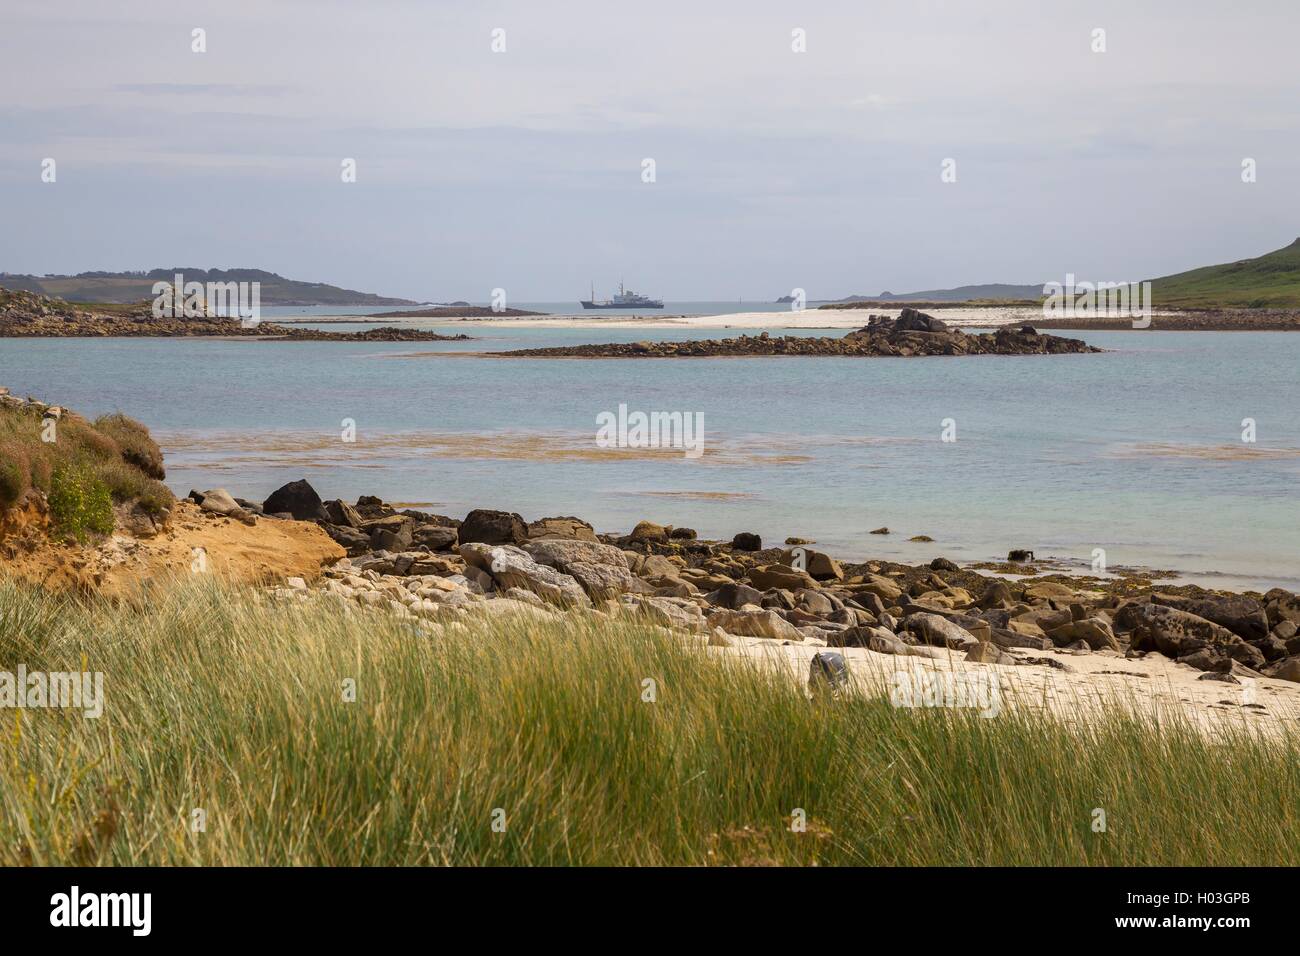 Rushy Bay, Bryher, Îles Scilly, Angleterre Banque D'Images